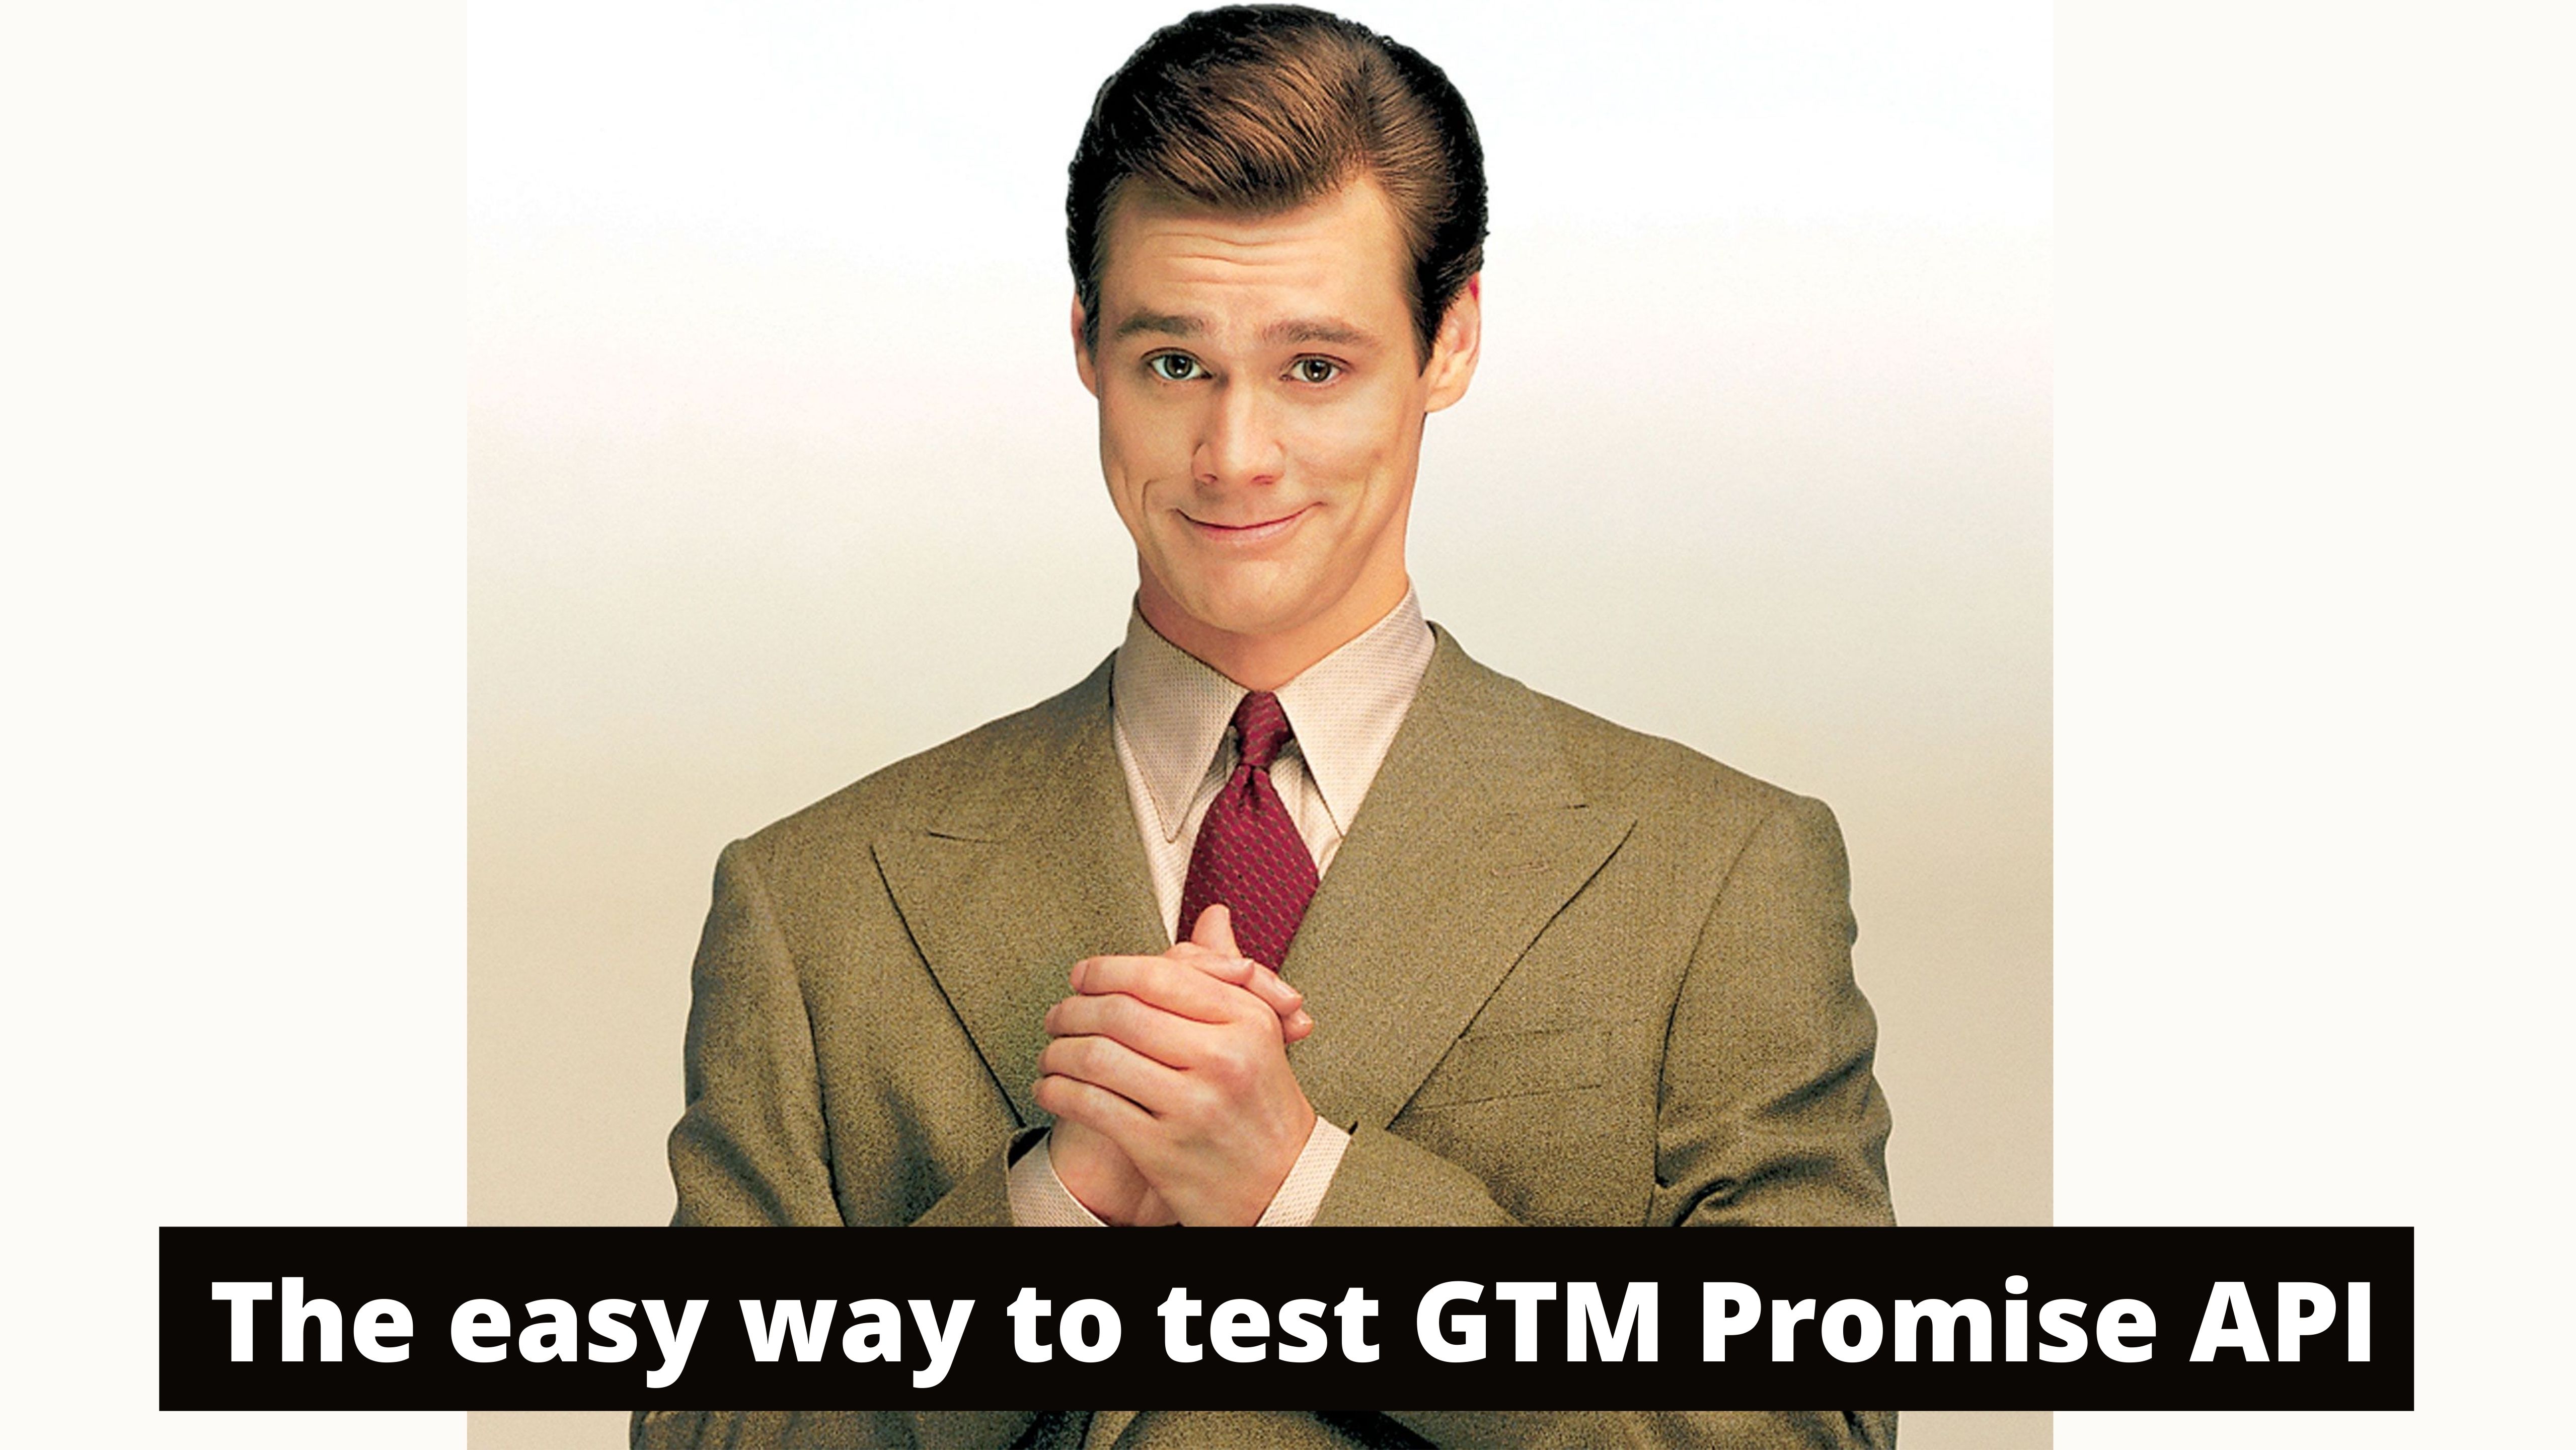 Server GTM Promise API. How to test?